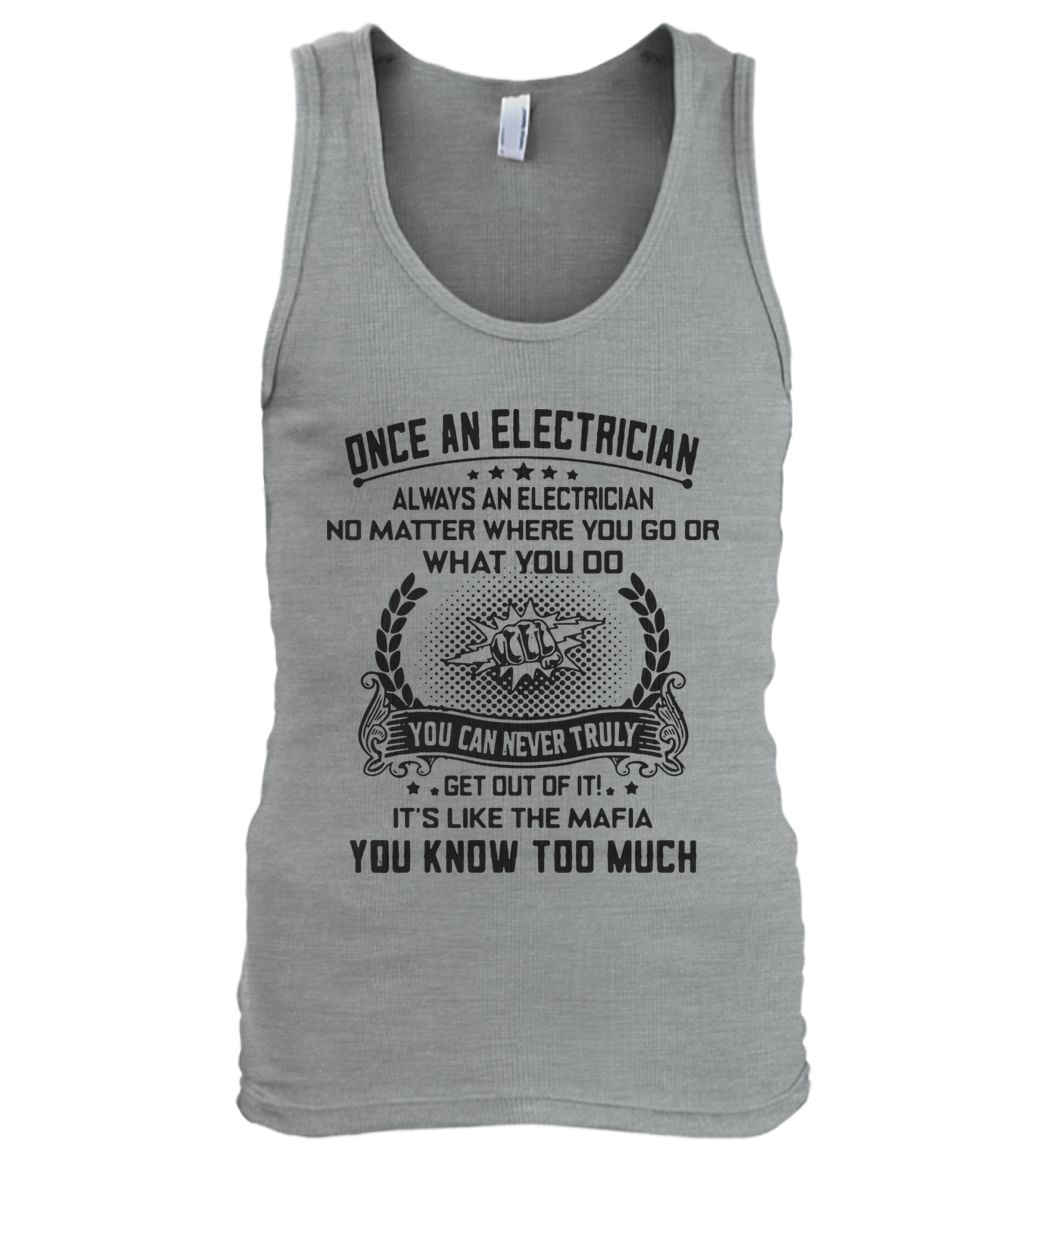 Once an electrician always an electrician no matter where you go men's tank top